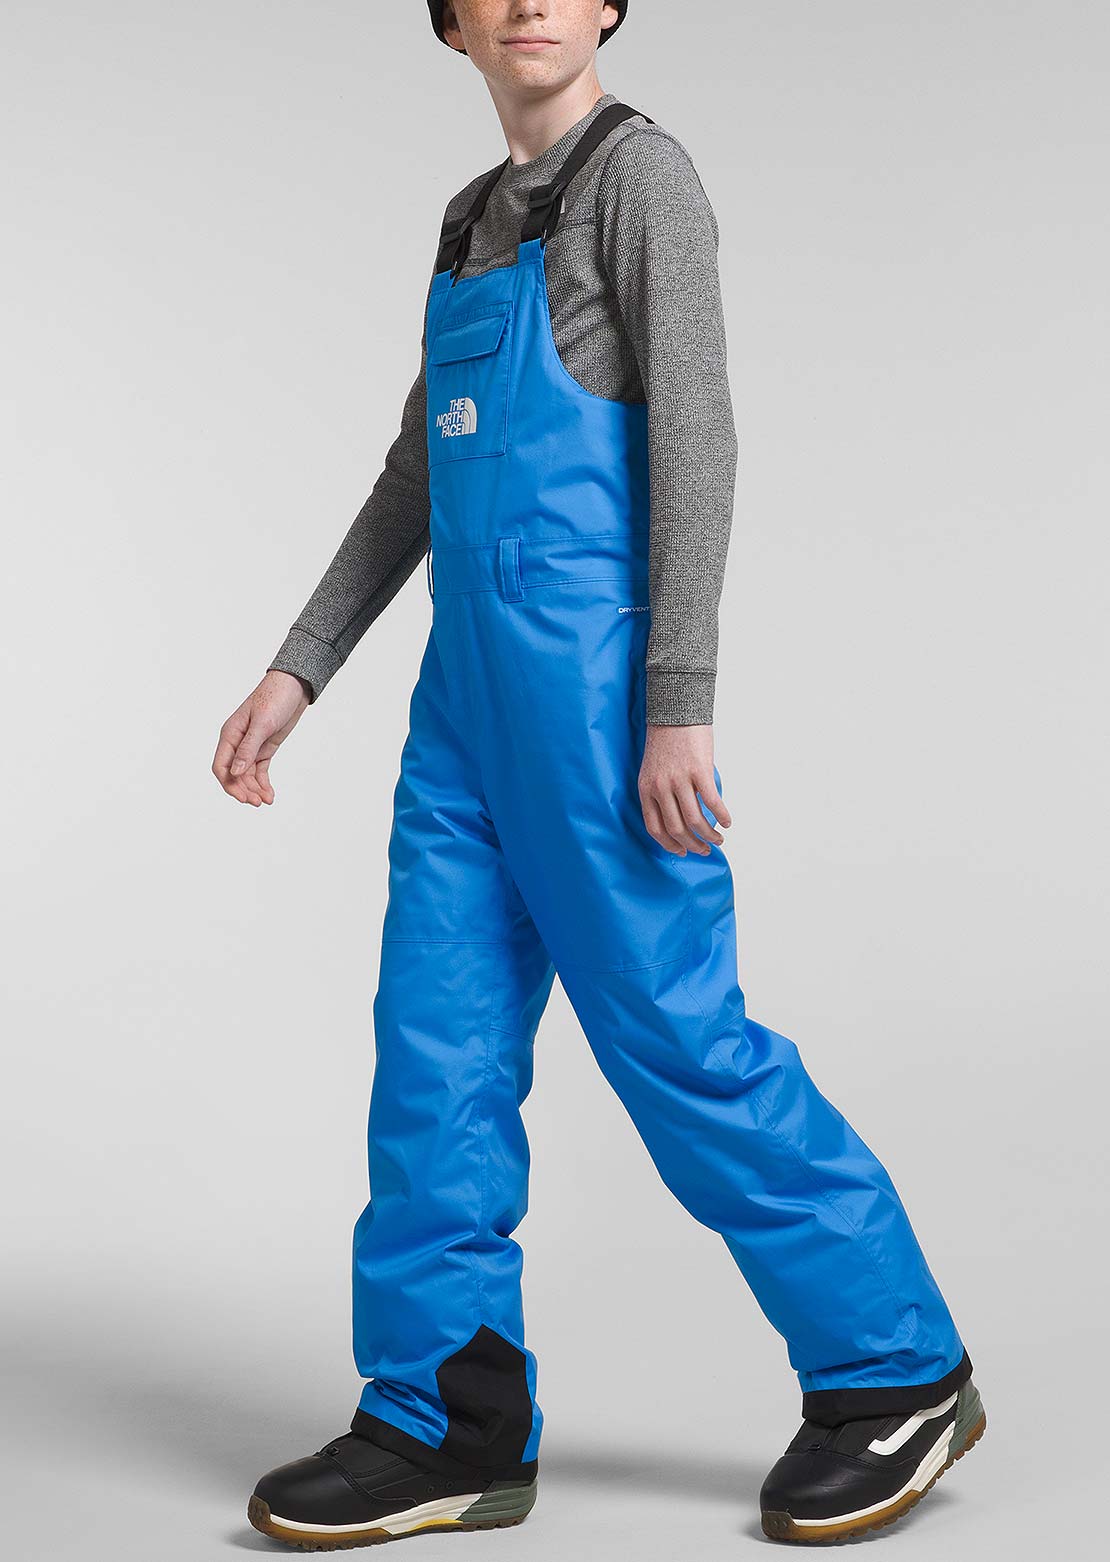 The North Face Junior Freedom Insulated Bib Pants Optic Blue